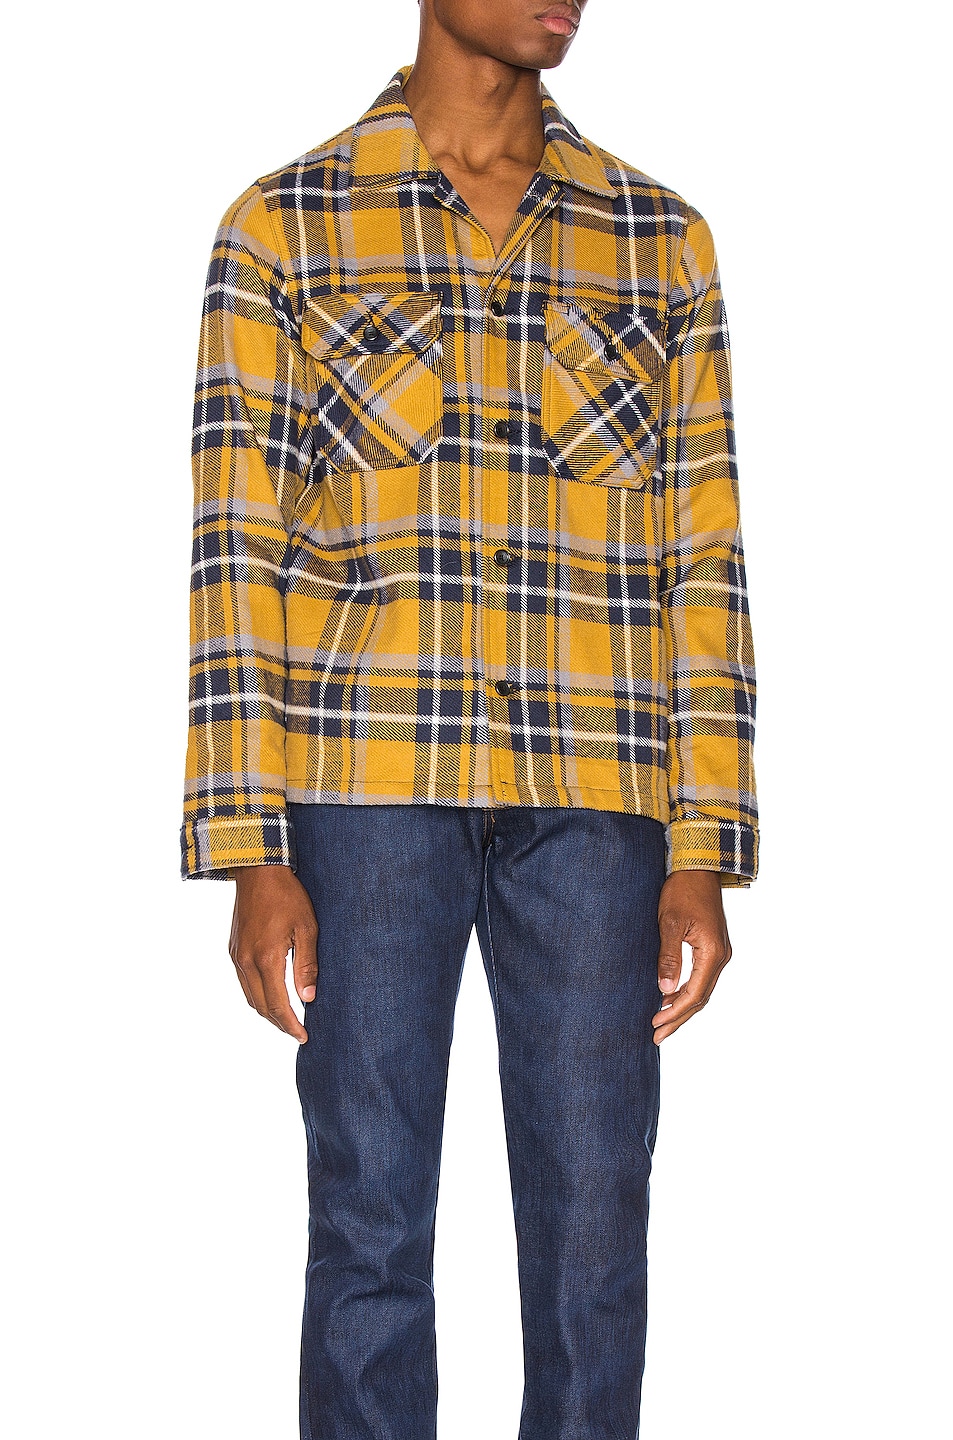 Image 1 of Naked & Famous Denim Work Shirt in Yellow & Blue Flannel